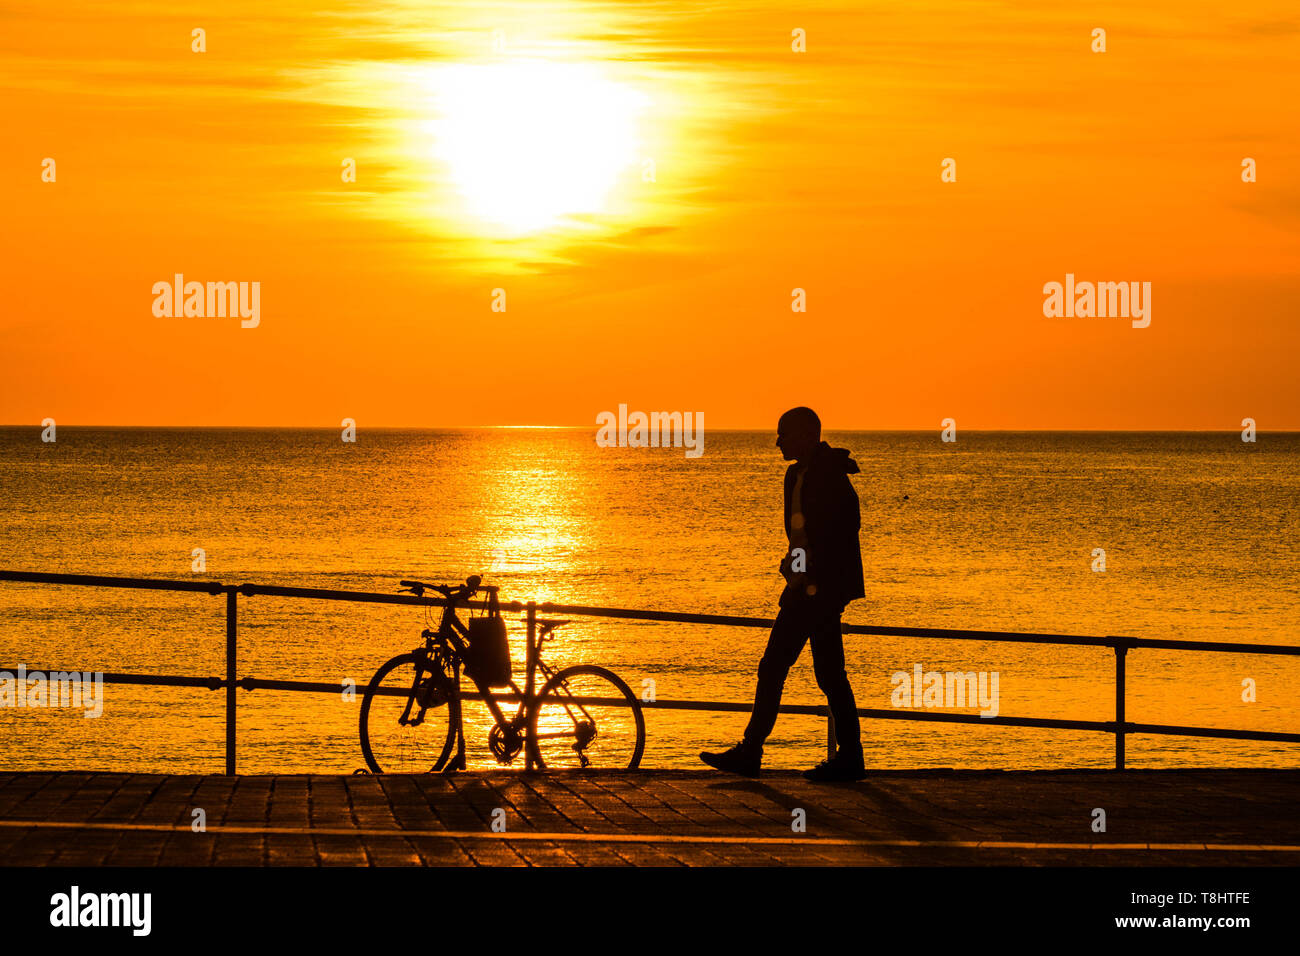 Aberystwyth Wales UK, Monday 13 May 2019  UK Weather: A glorious golden sunset over the waters of Cardigan Bay at Aberystwyth , bringing to an end a day pf unbroken warm spring sunshine as a high pressure system dominates the weather over the whole of the UK . photo credit Keith Morris / Alamy Live News Stock Photo